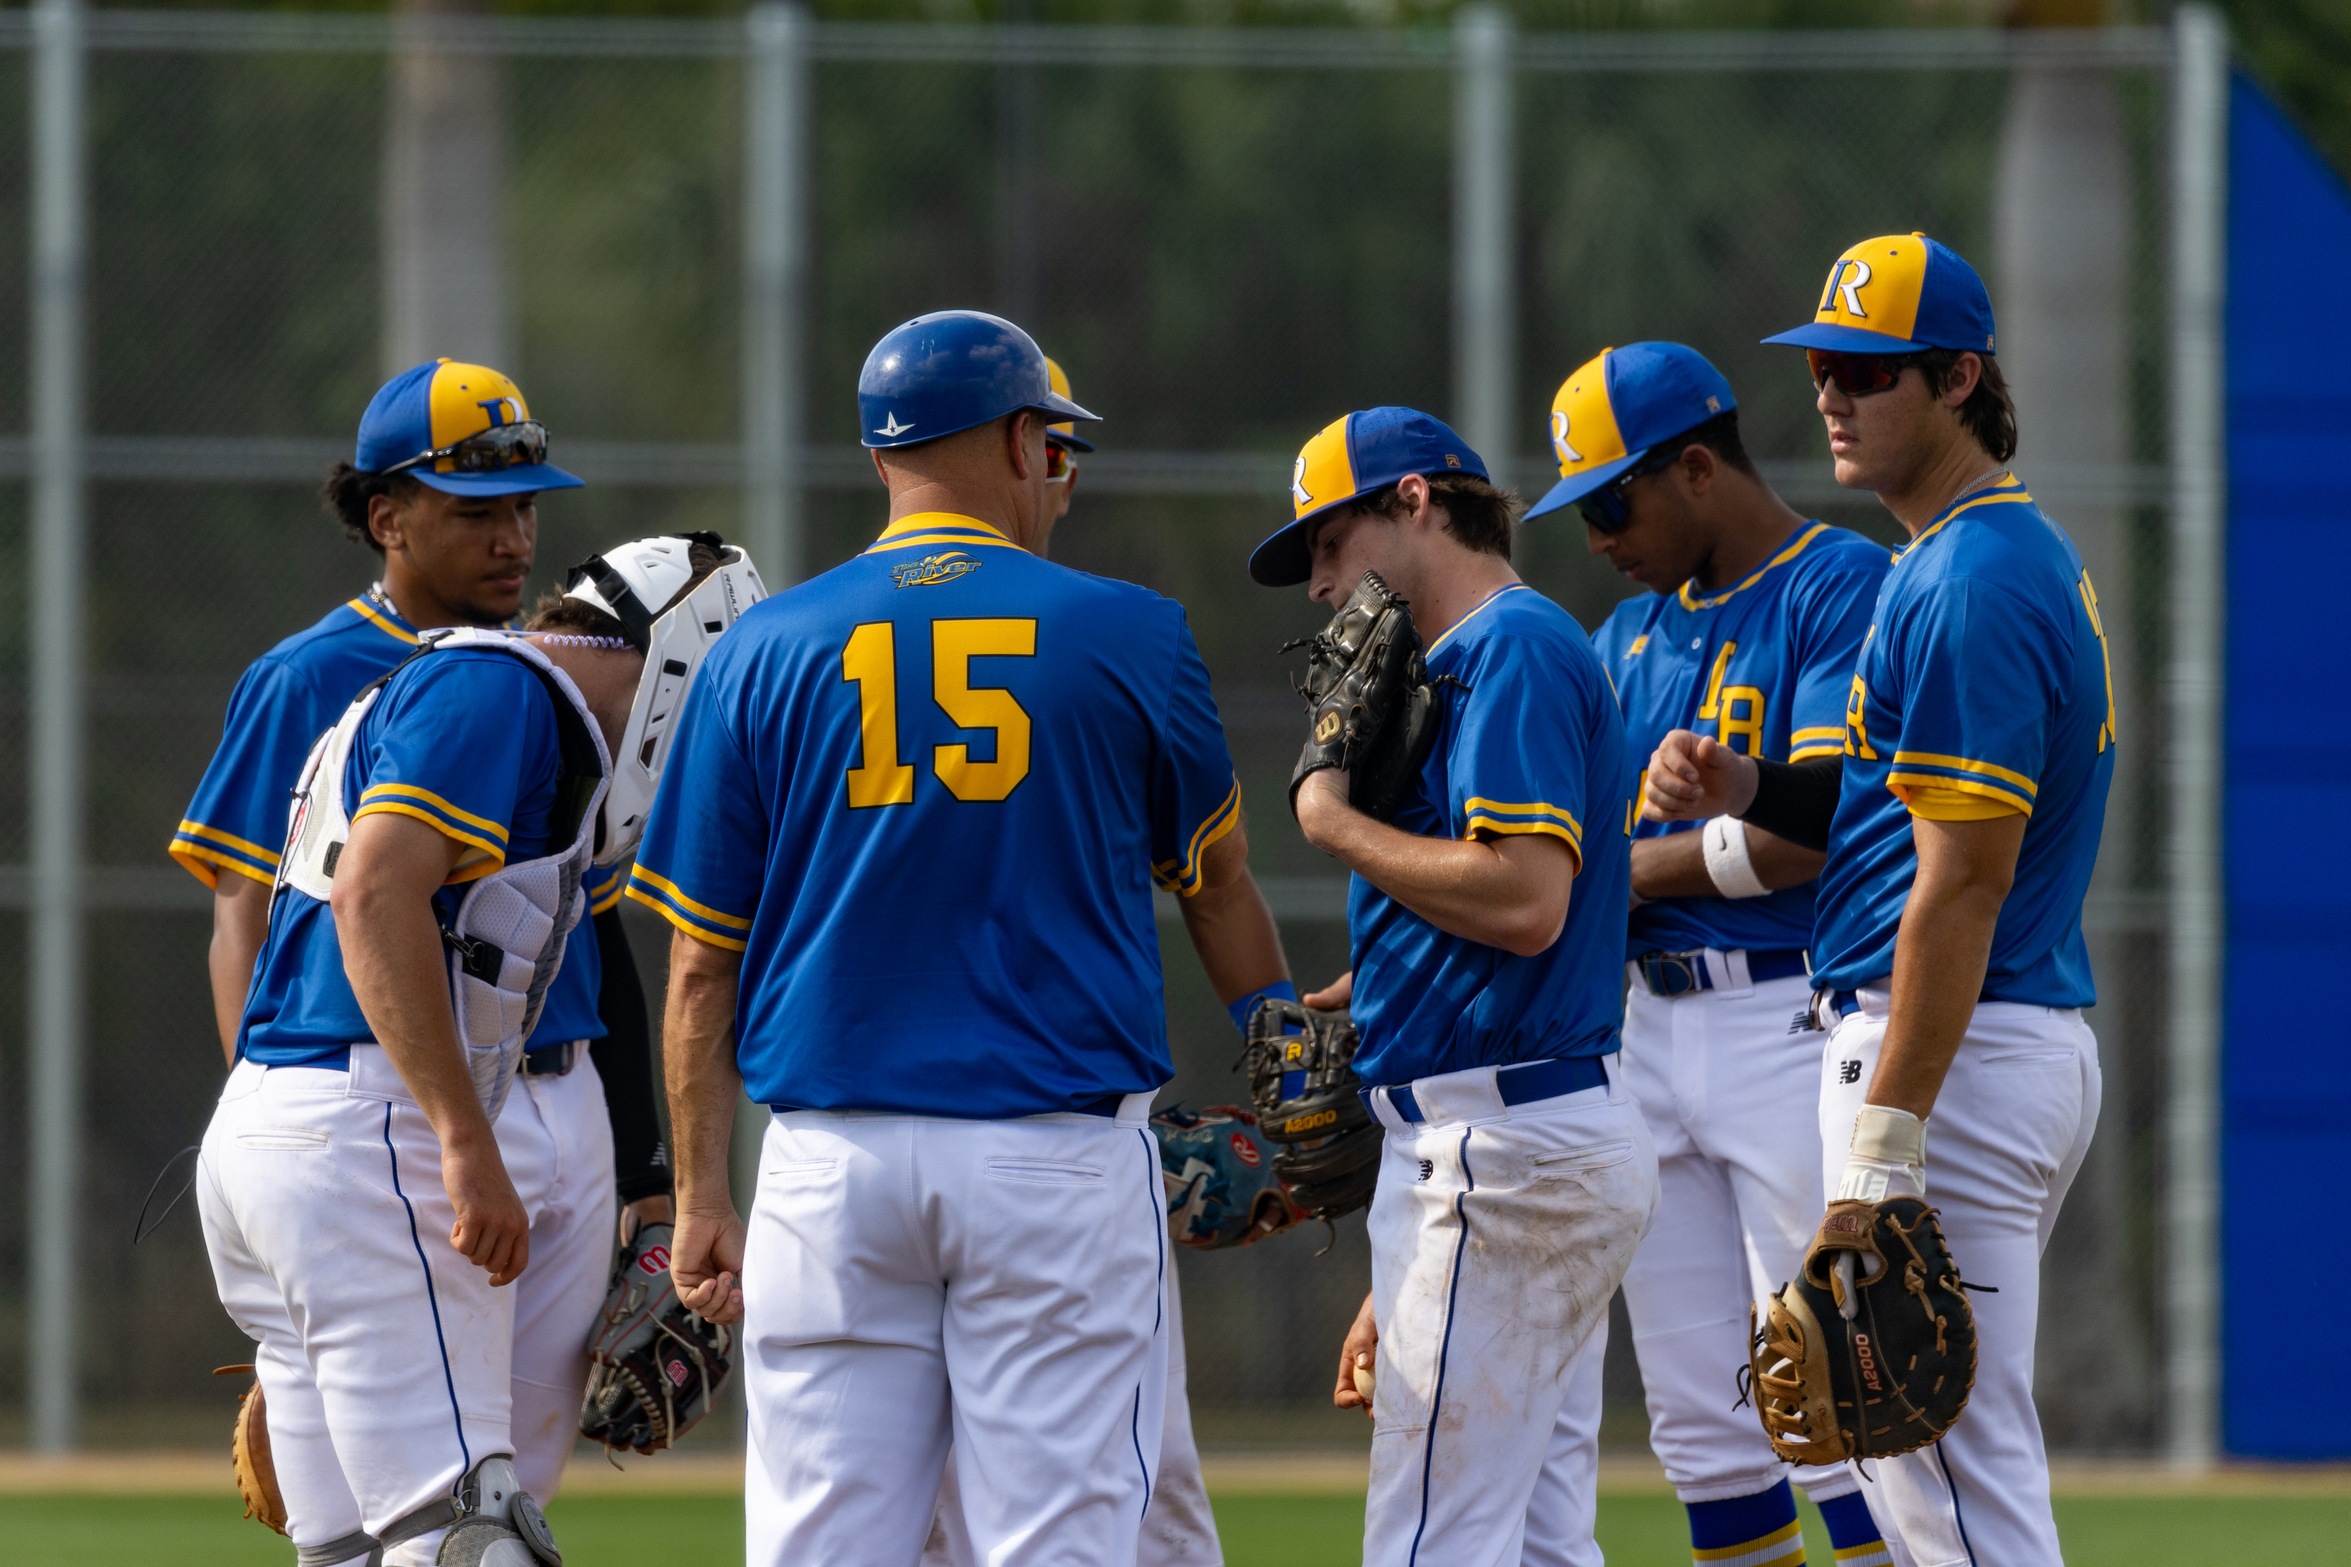 Baseball Falls to College Of Central Florida